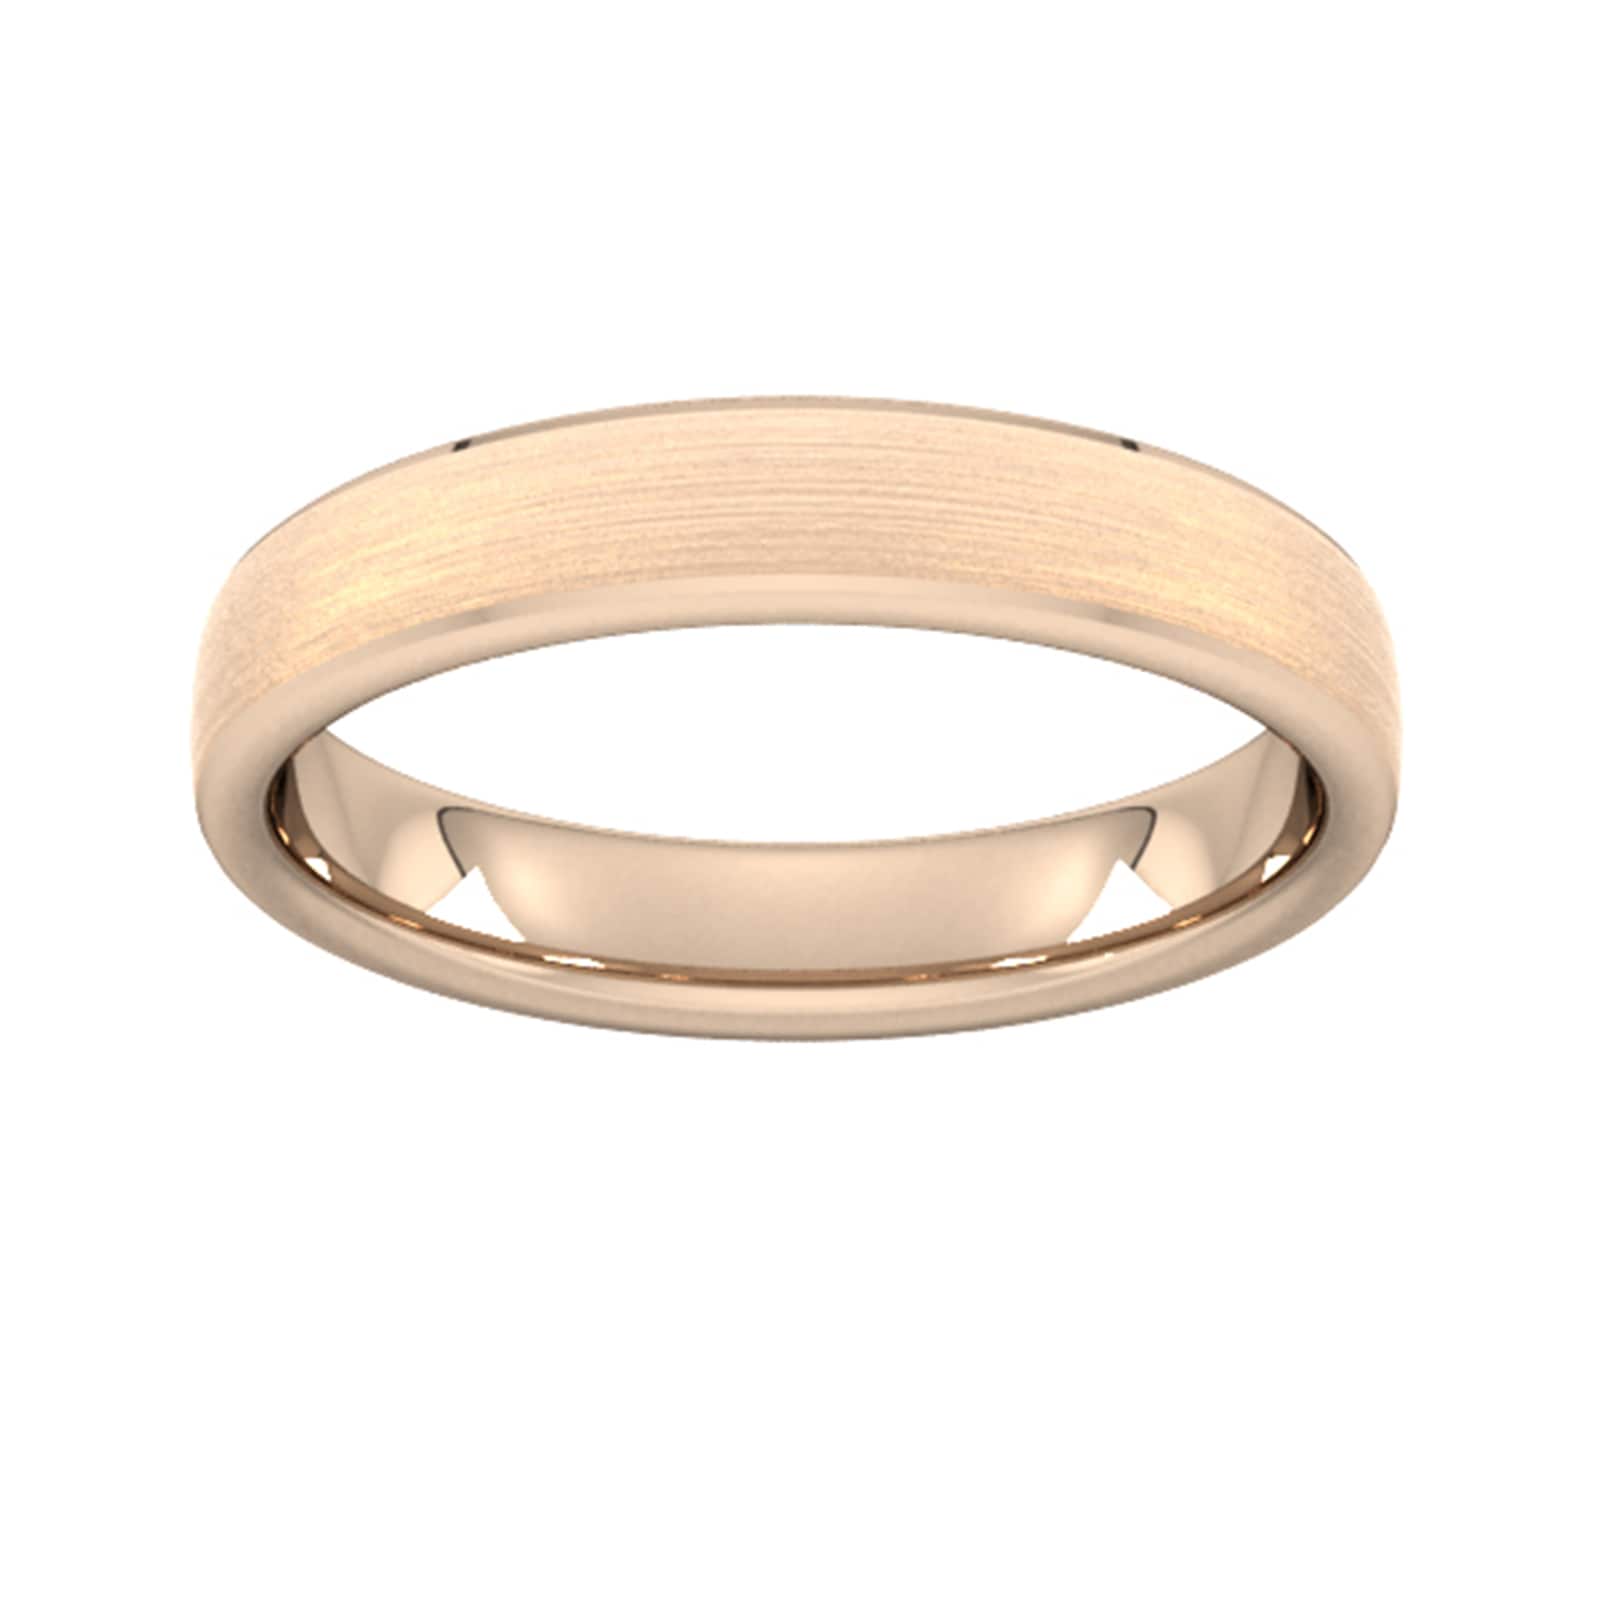 4mm Slight Court Extra Heavy Polished Chamfered Edges With Matt Centre Wedding Ring In 9 Carat Rose Gold - Ring Size L